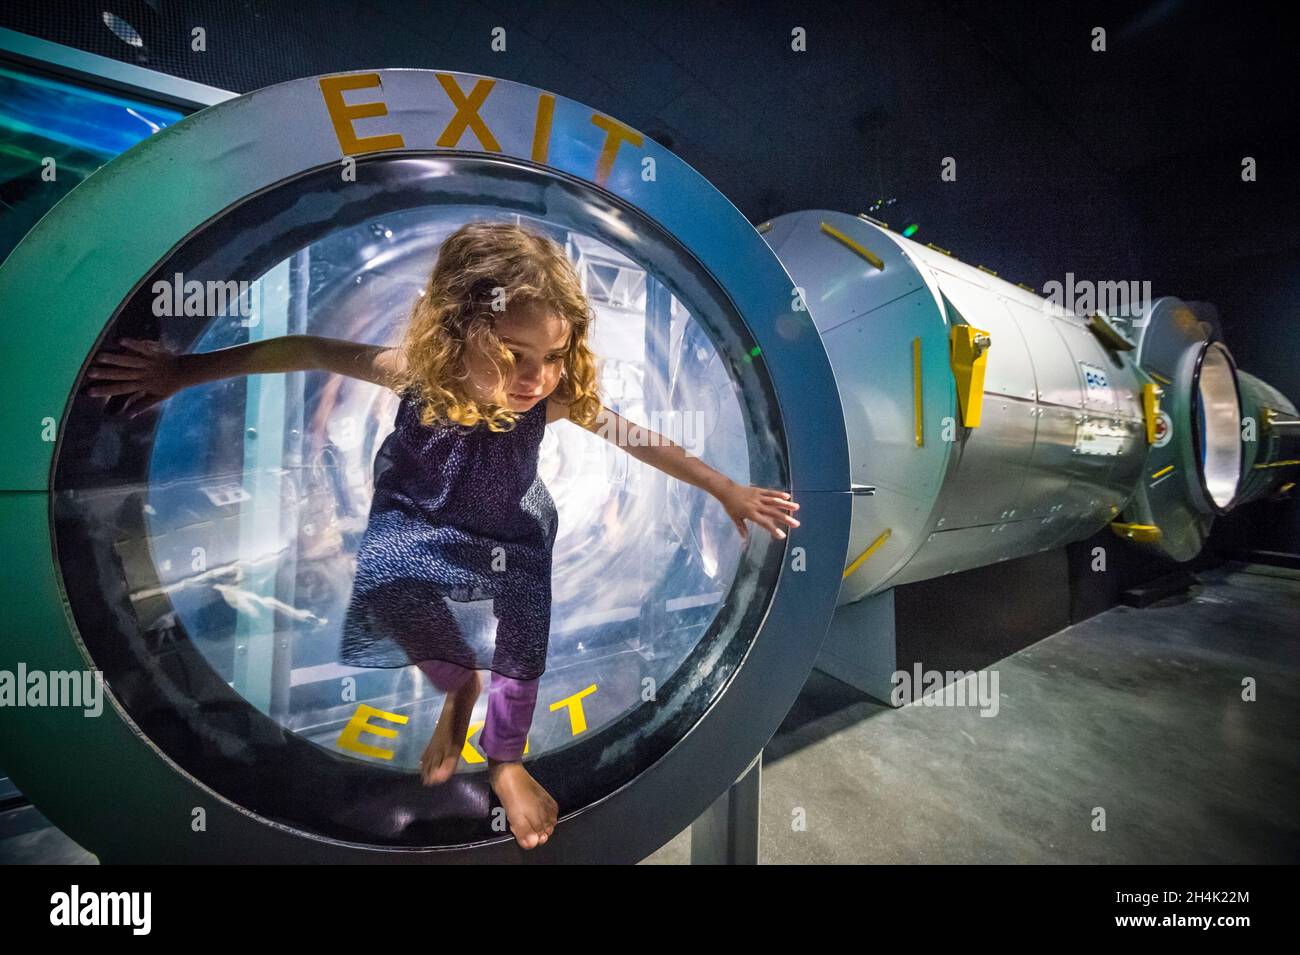 United States, Florida, Orlando, Cape Canaveral, Kennedy Space Center, space museum, child emerging from a space station replica Stock Photo